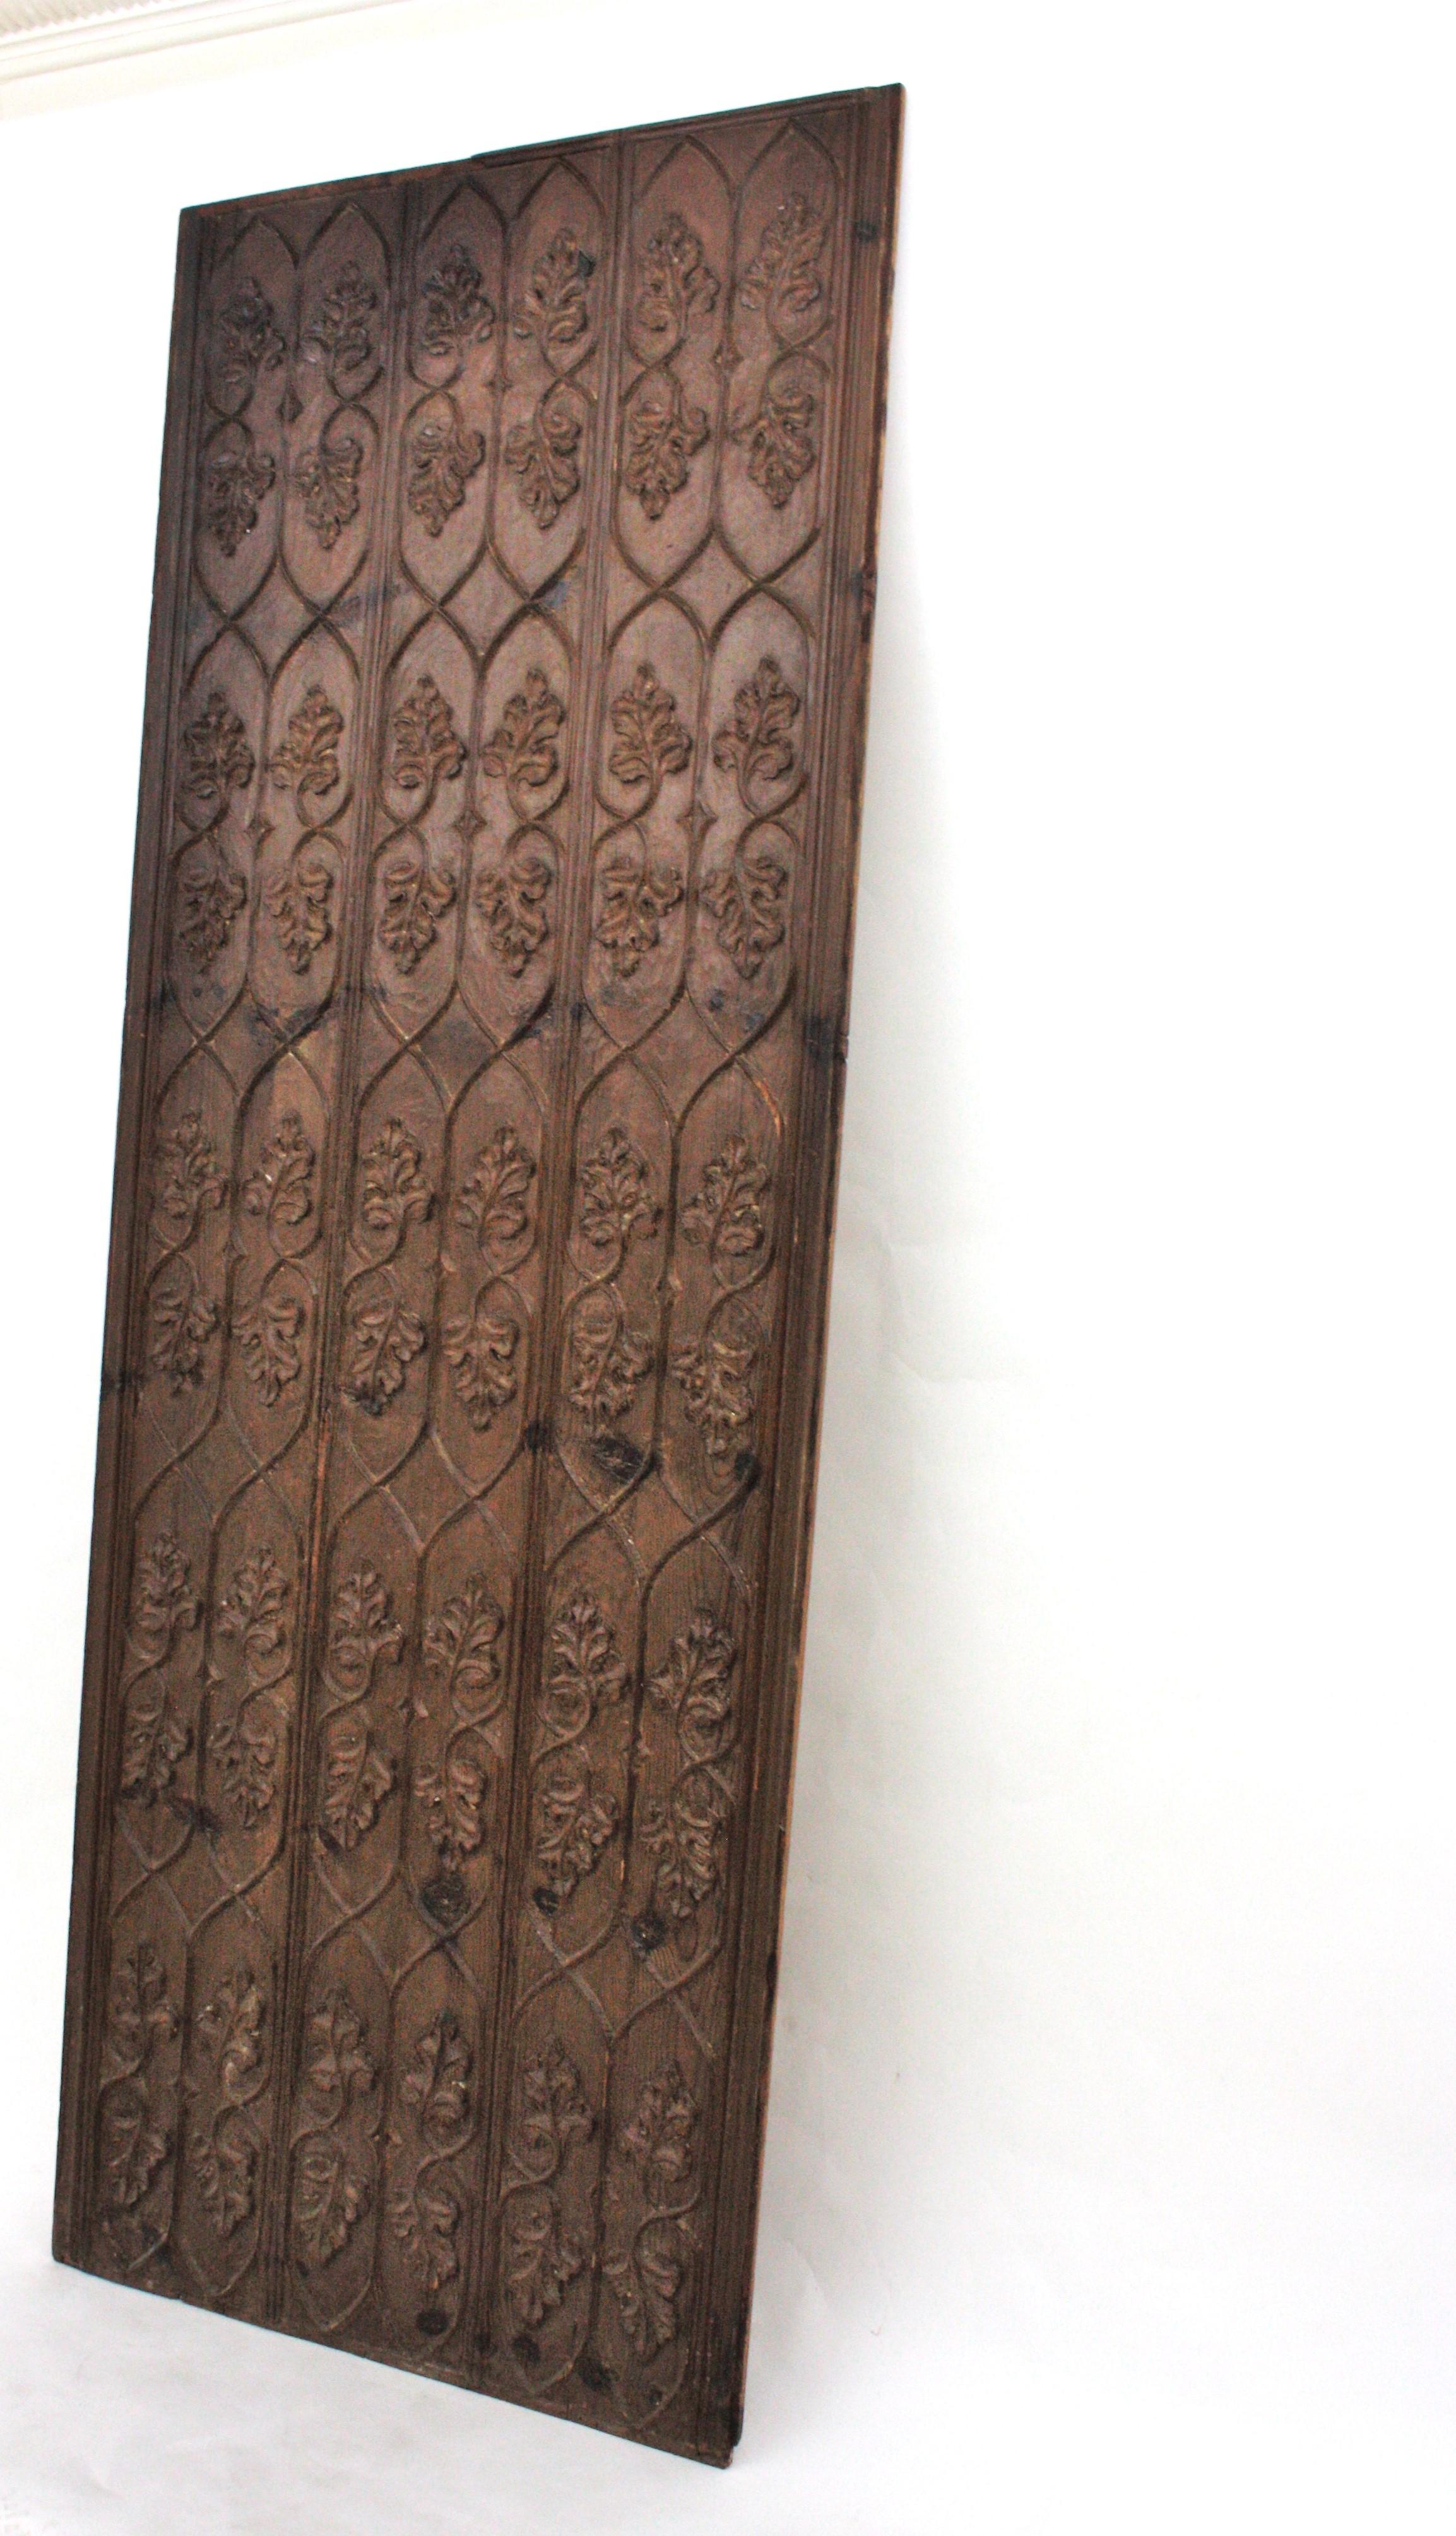 Spanish Hand-Carved Walnut Wood Decorative Wall Panel with Foliage Motifs For Sale 6